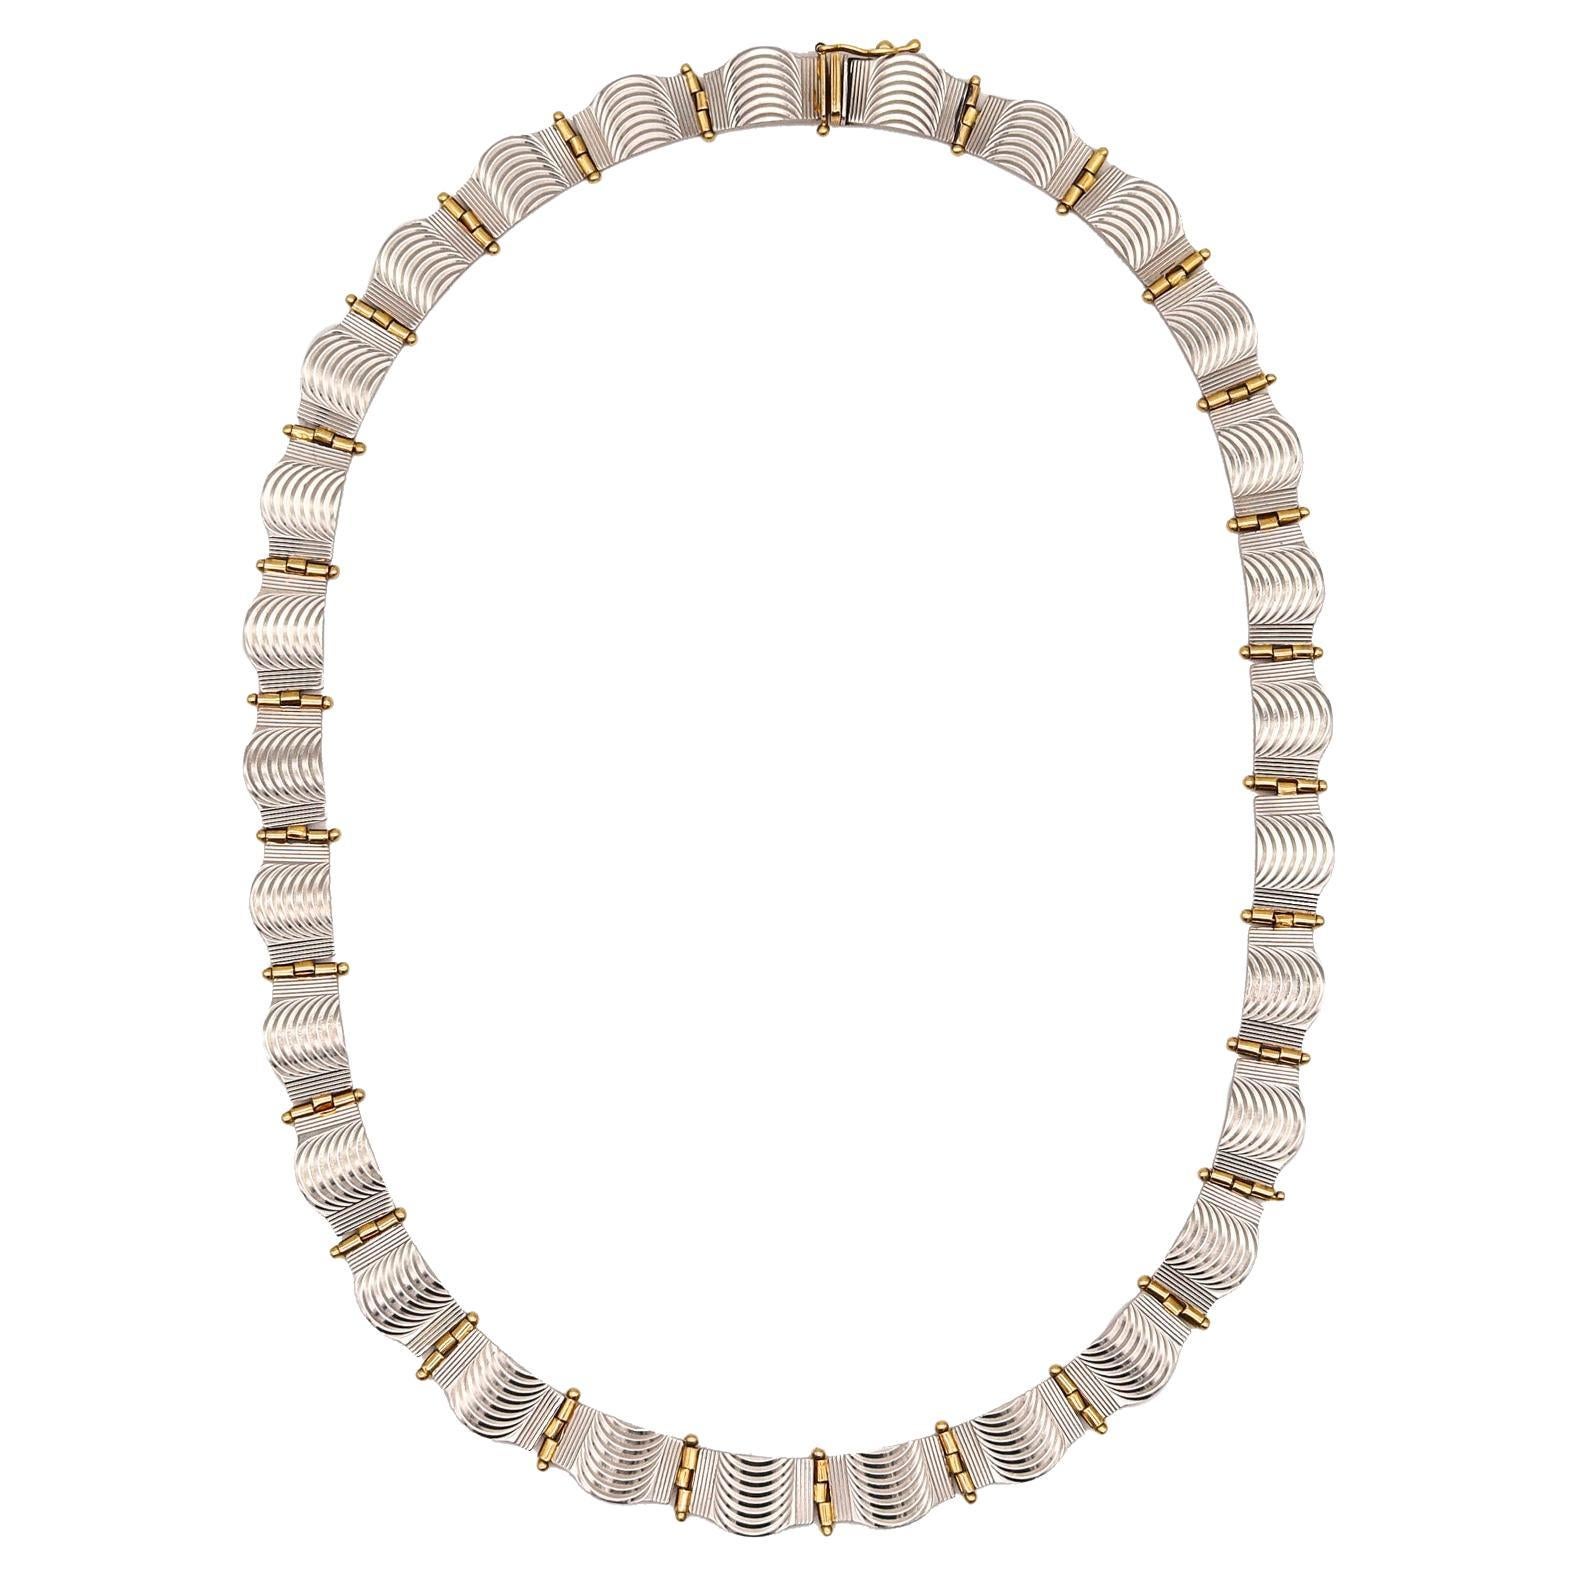 German 1935 Art Deco Undulated Patterns Collar Necklace Platinum and 18Kt Gold For Sale